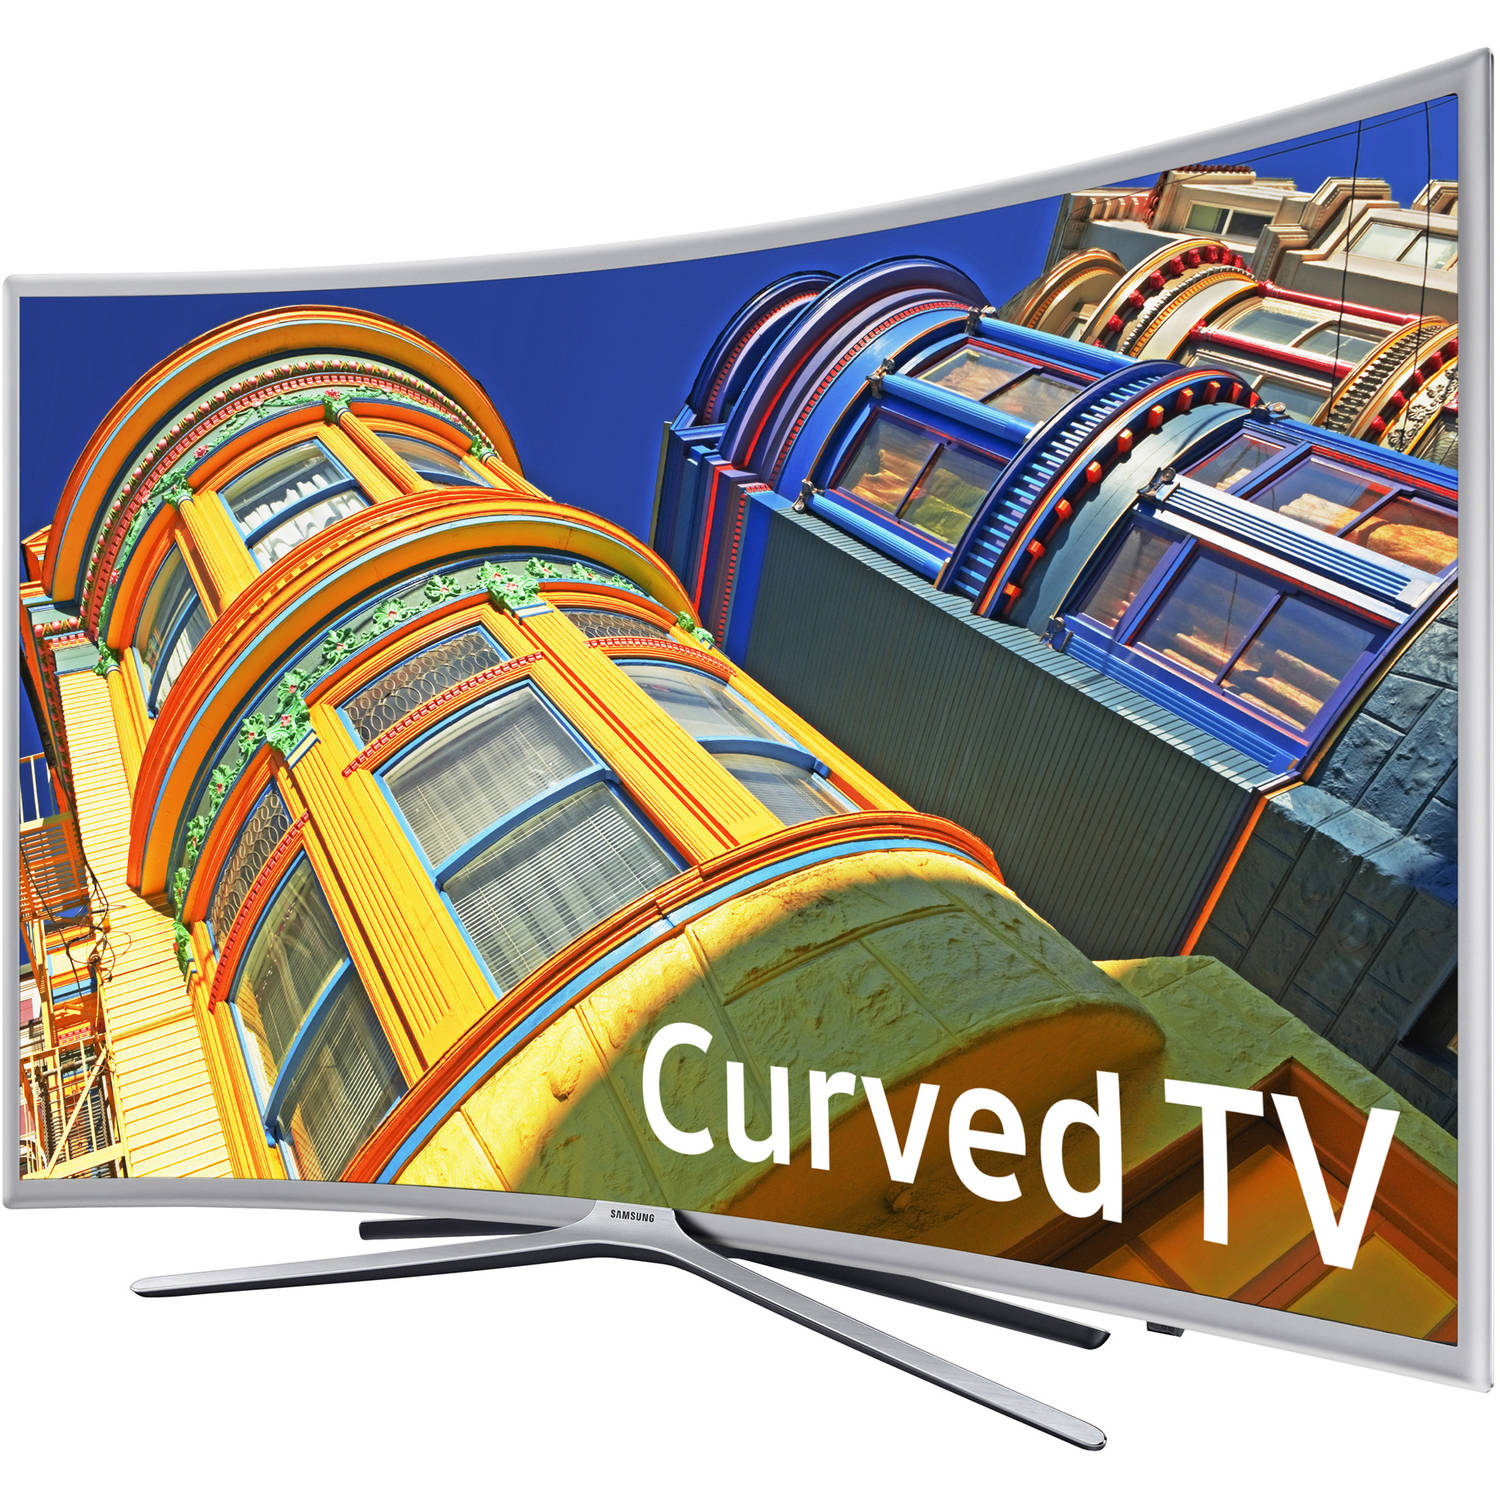 Refurbished Samsung 55" Class FHD (1080P) Curved Smart LED TV (UN55K6250AFXZA) - image 2 of 6